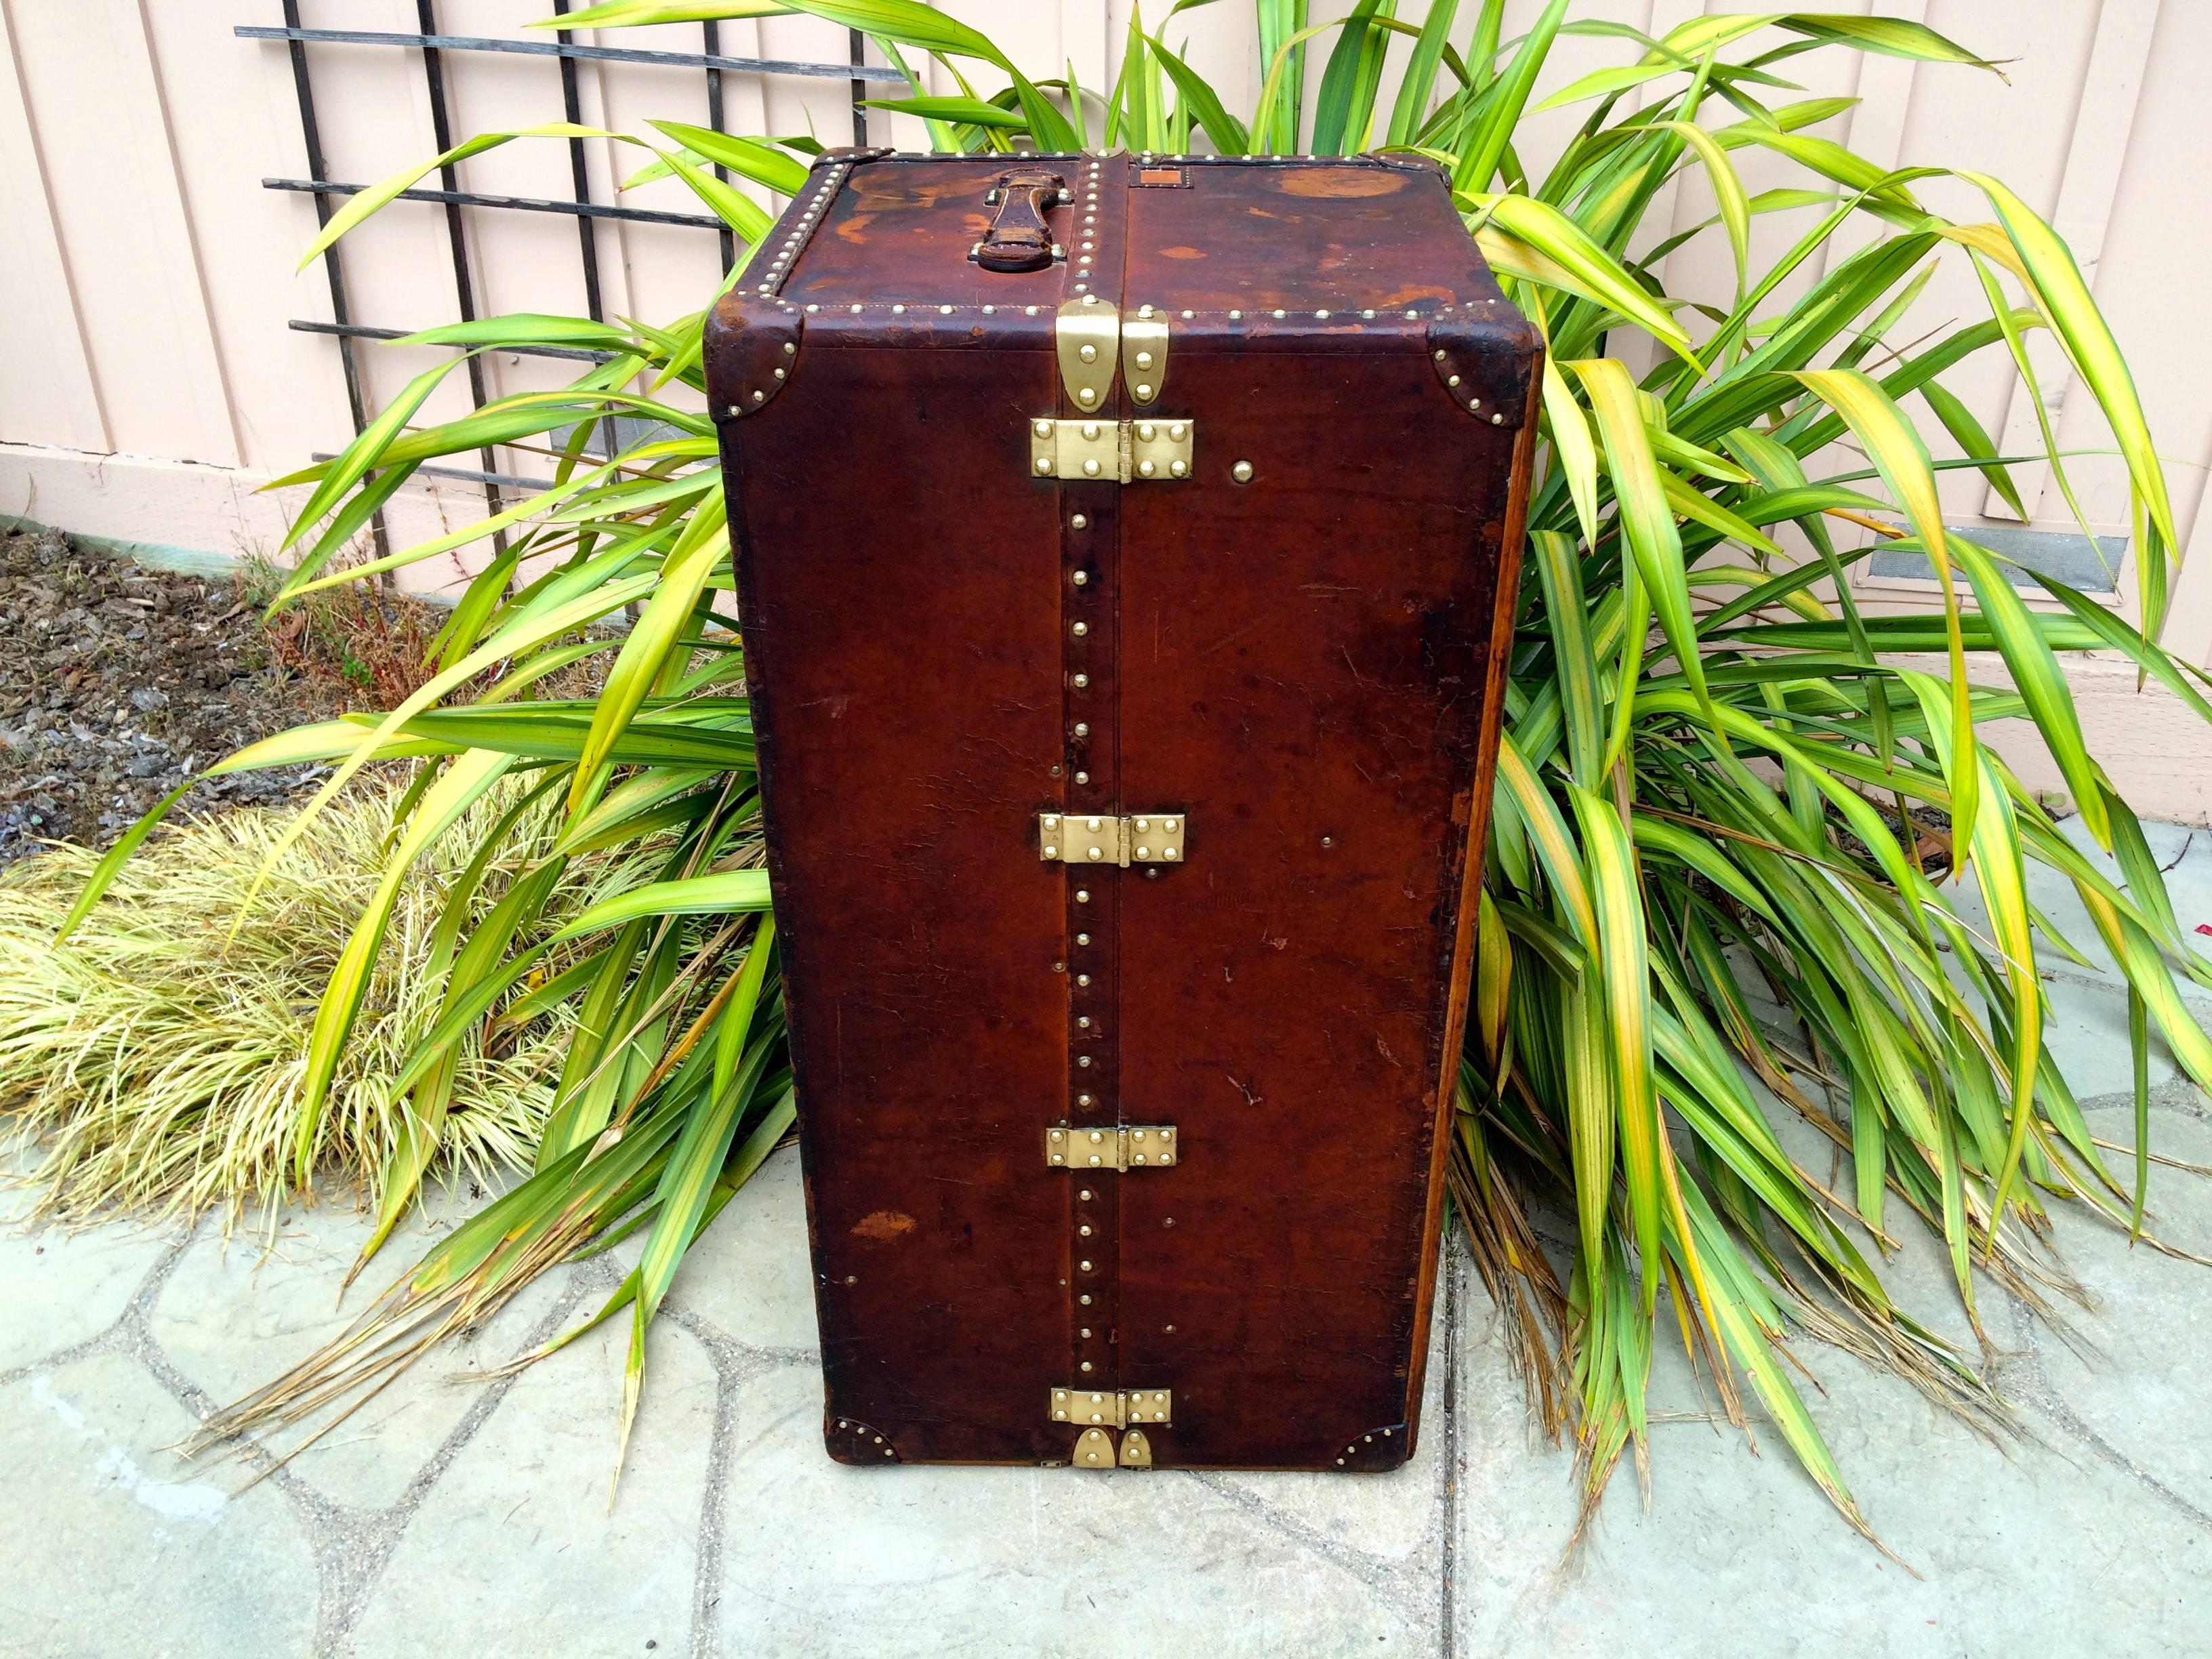 Louis Vuitton Antique Leather Wardrobe Steamer Trunk  Goyard Purse bag suitcase In Excellent Condition For Sale In Carmel-by-the-sea, CA